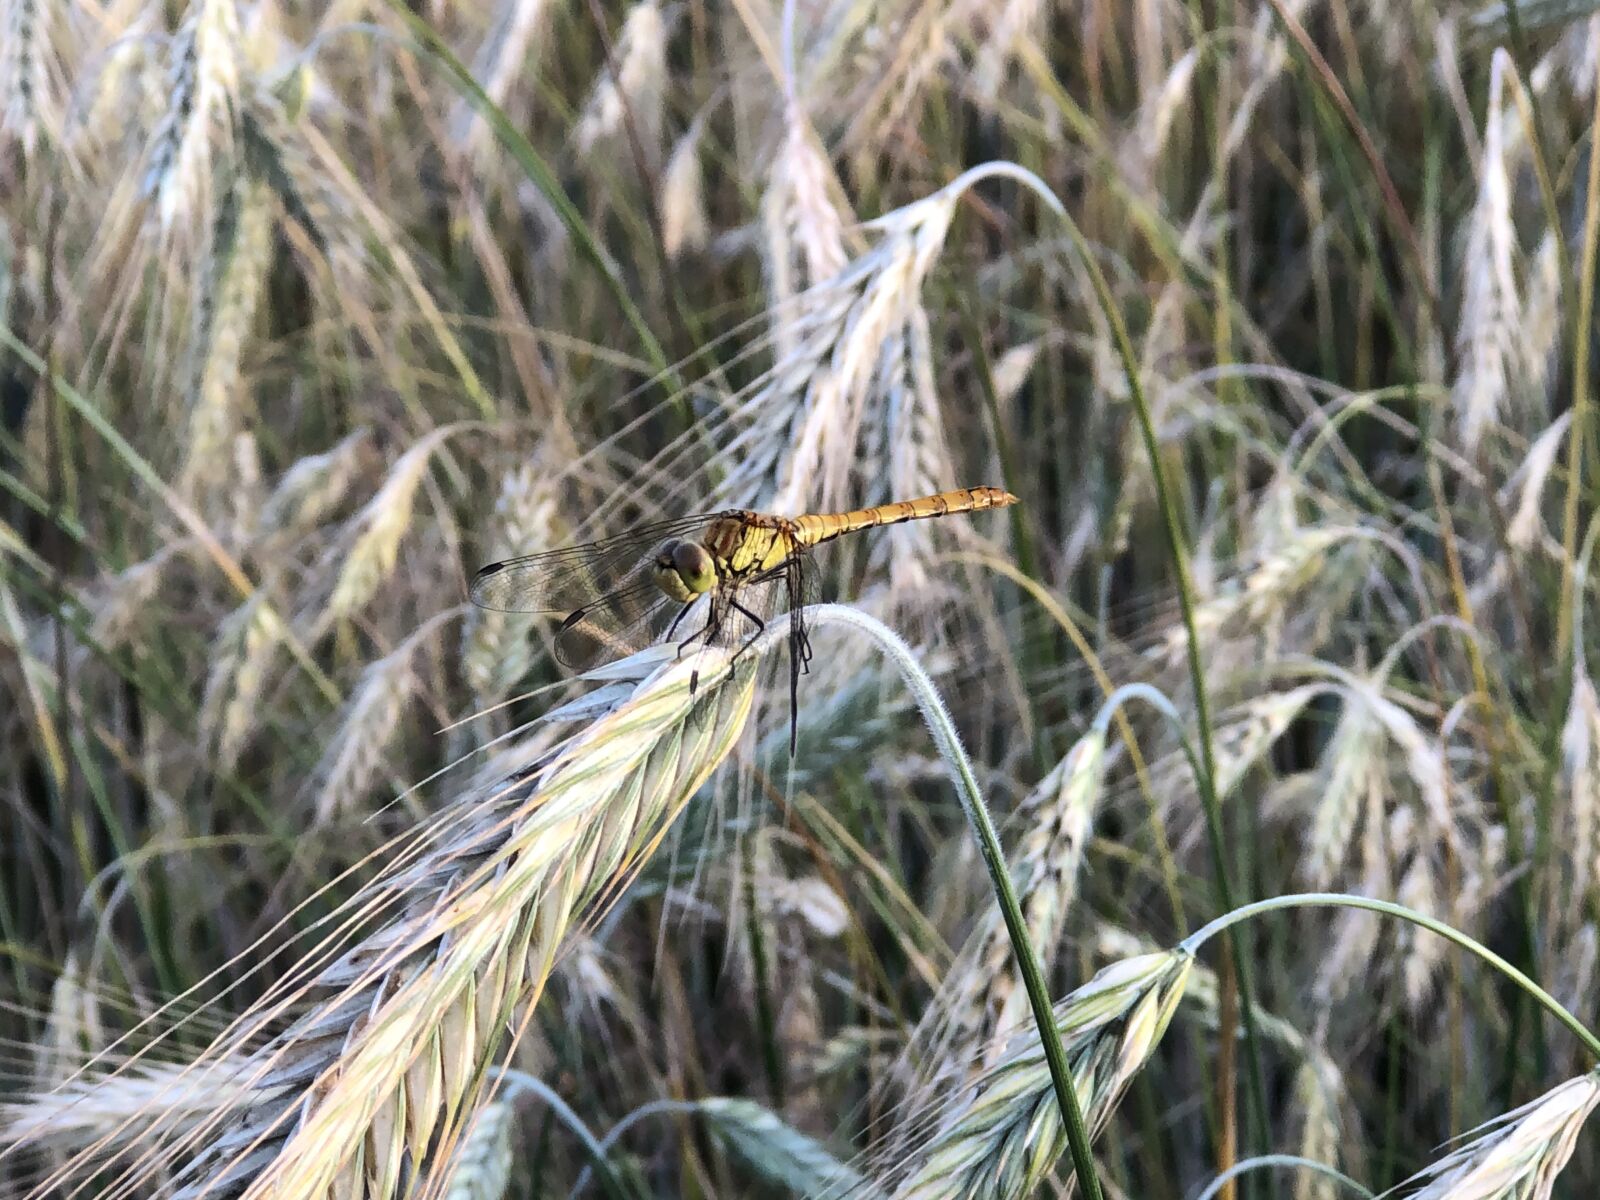 Apple iPhone 8 Plus + iPhone 8 Plus back dual camera 6.6mm f/2.8 sample photo. Cereals, dragonfly, nature photography